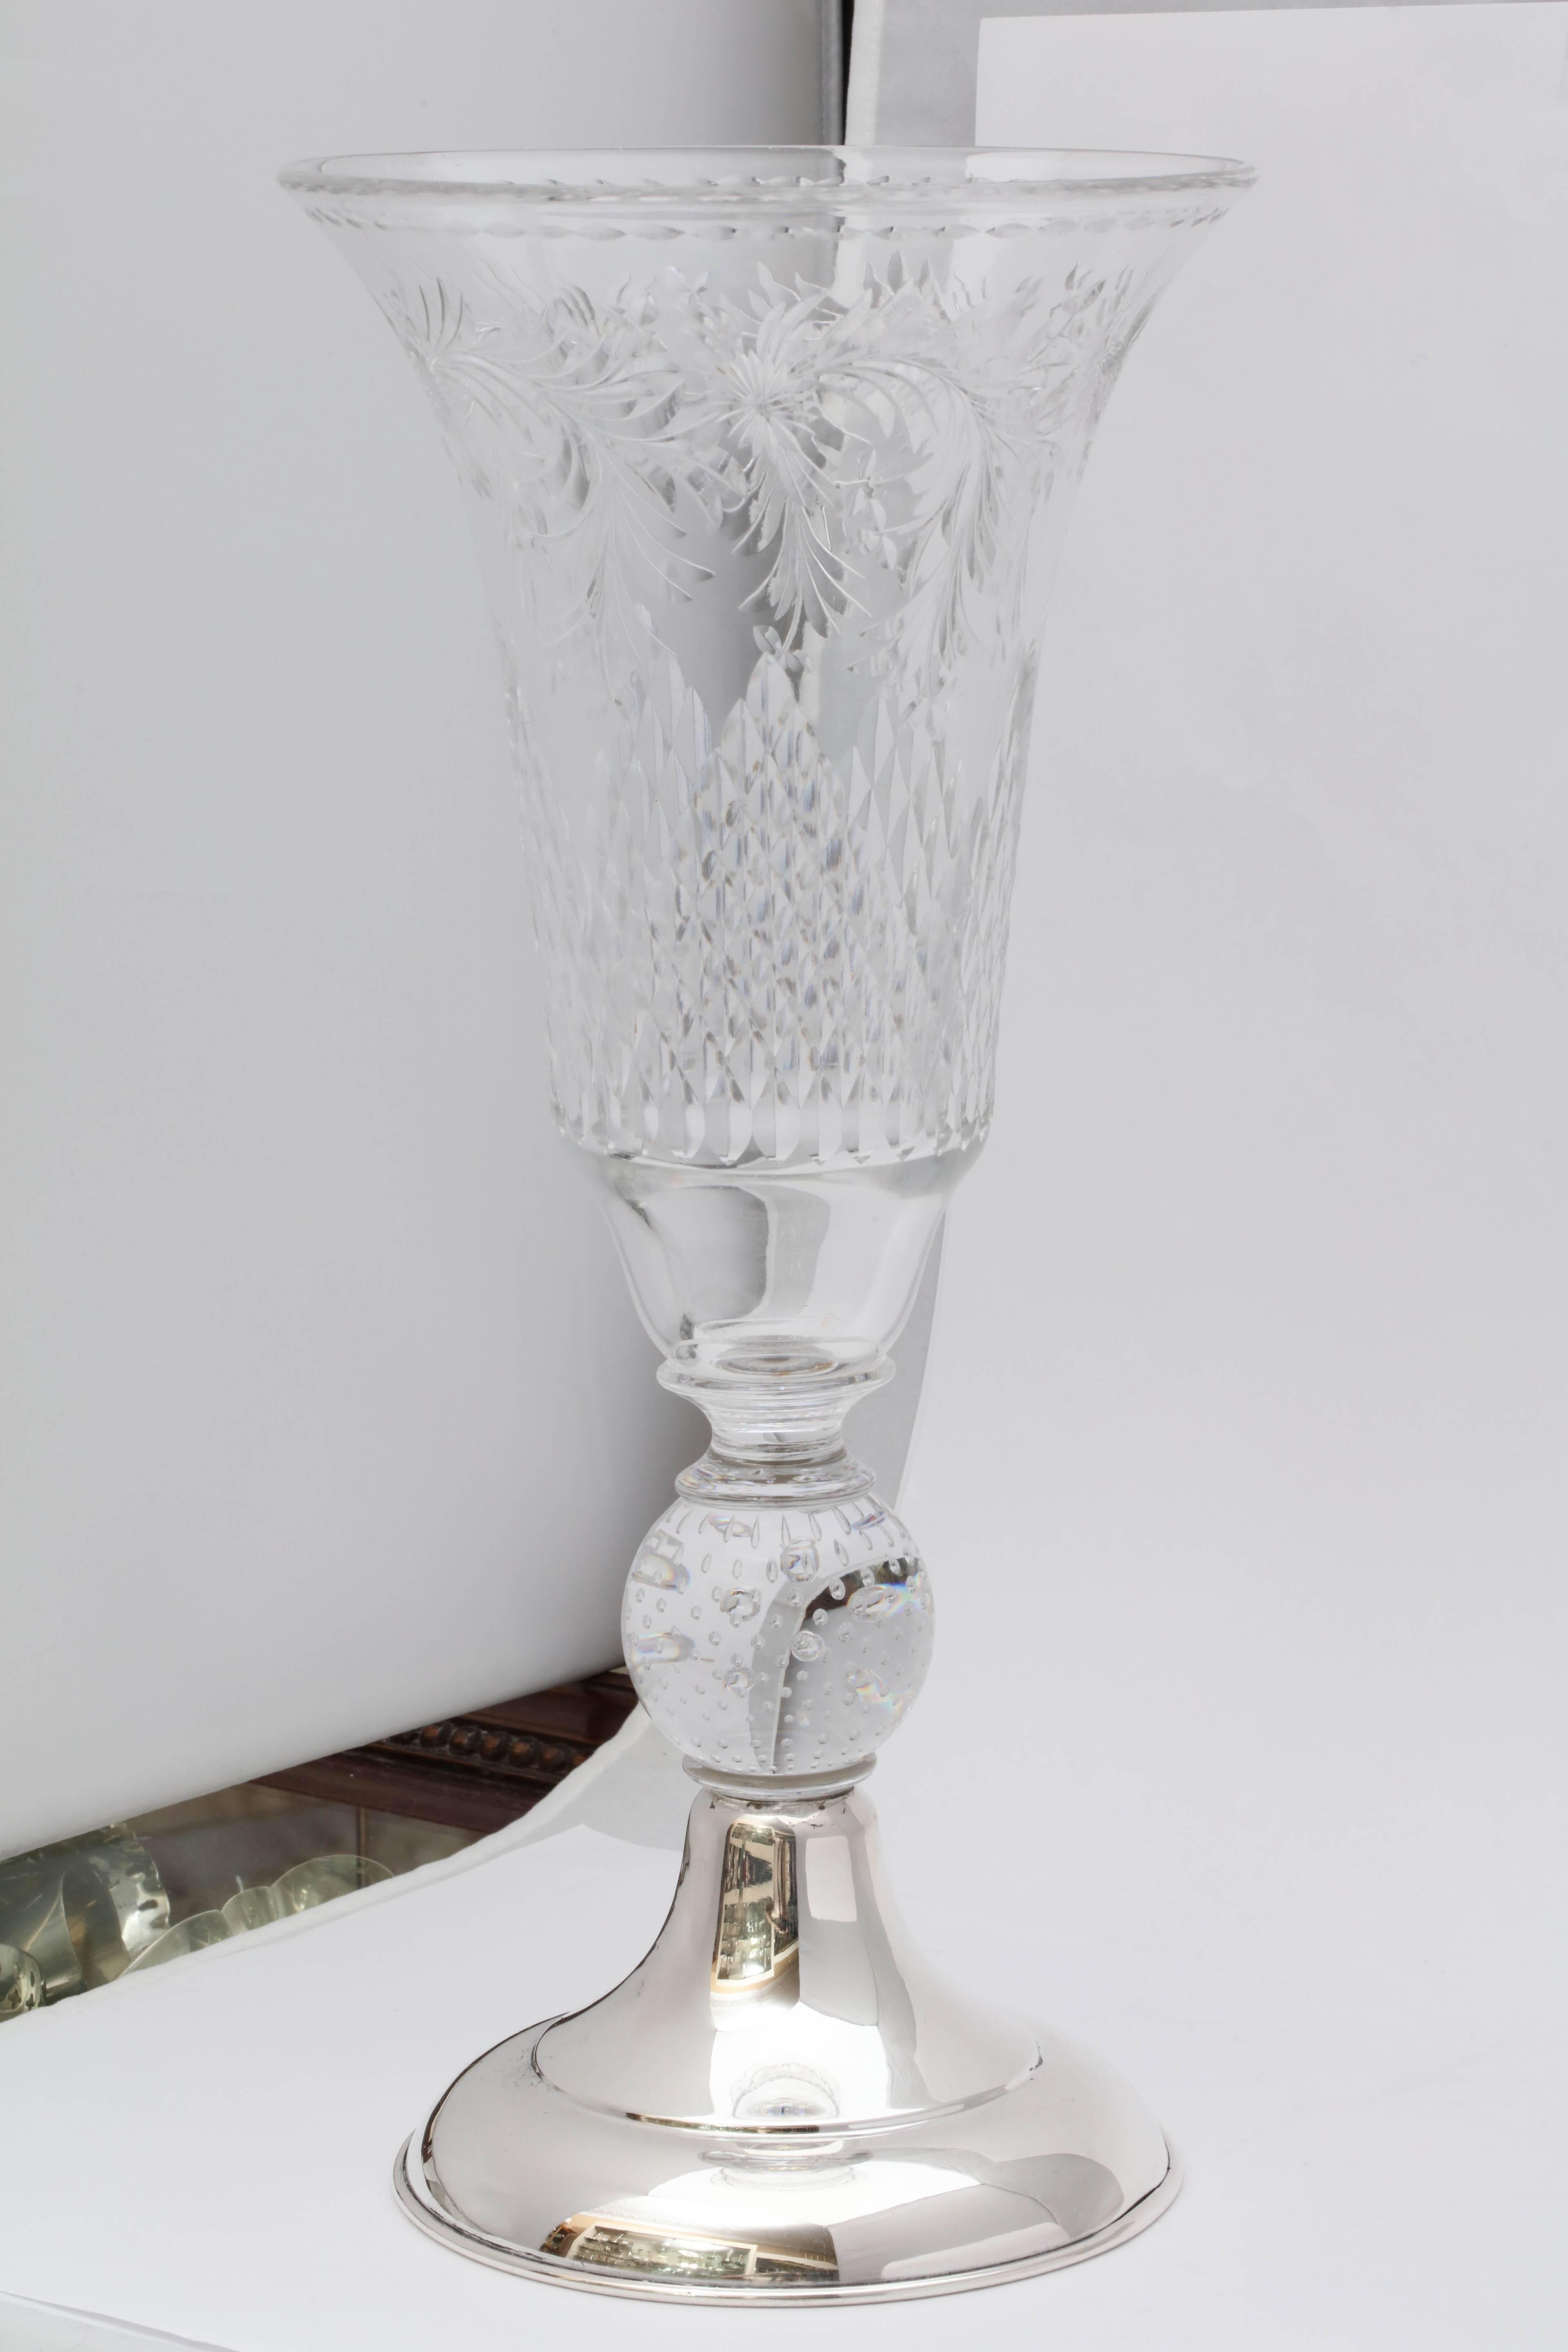 Edwardian, rare, large, Edwardian, Hawkes, sterling silver mounted, wheel and diamond cut crystal vase with controlled bubbles ball connecting vase to sterling silver mount, The Hawkes Company, New York, circa 1910. Measure: 14 inches high x 6 1/2